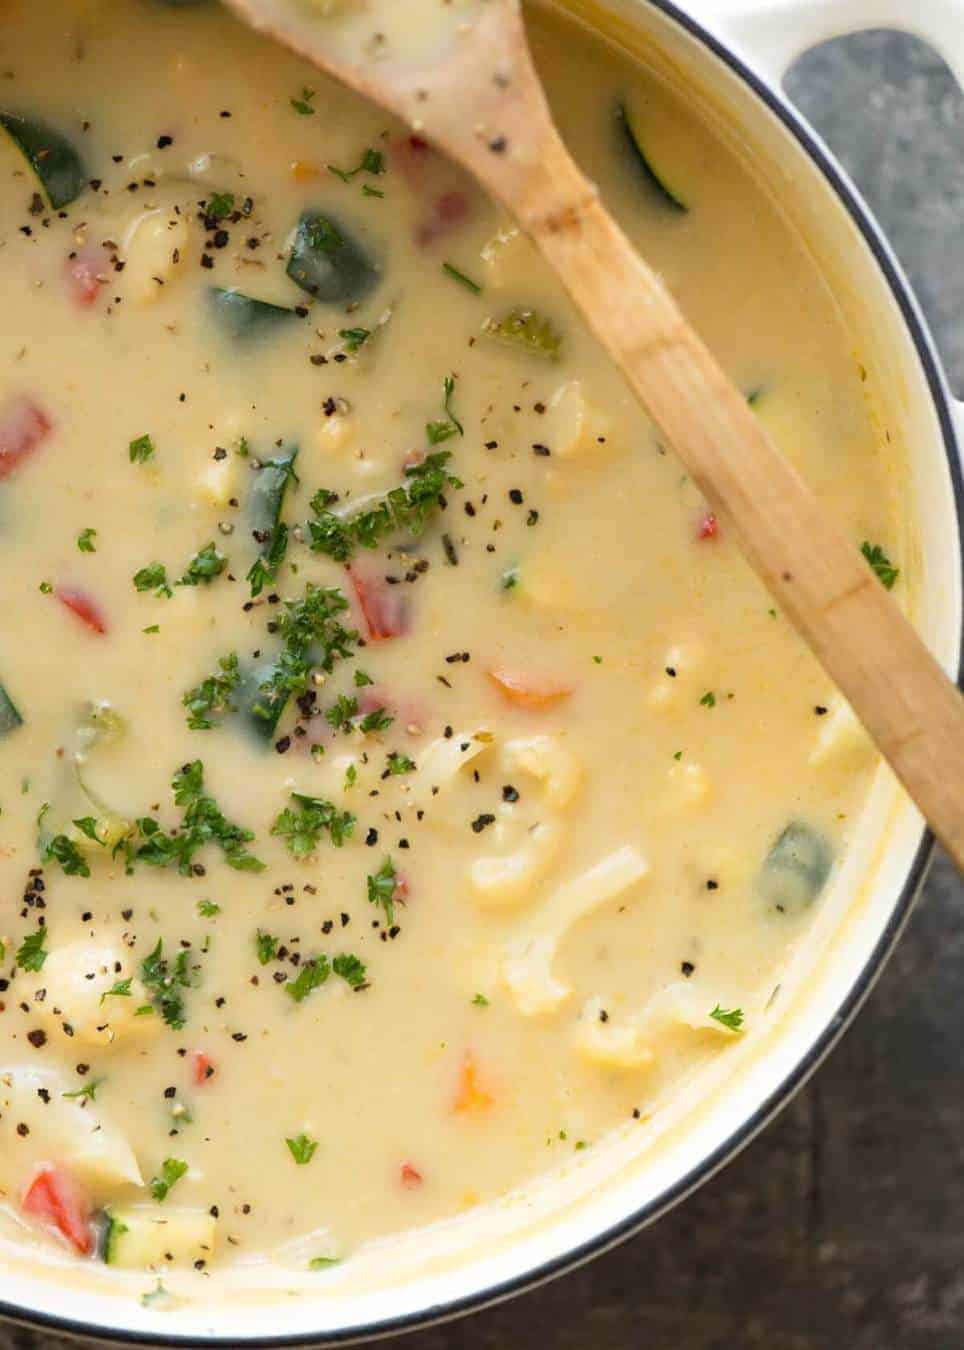 It's a miracle - this Creamy Healthy Vegetable Soup is super low cal, low carb, gluten free and unbelievably tasty. The secret: peeled zucchini, cauliflower, onion and garlic cooked then pureed. Imagine the possibilities! recipetineats.com